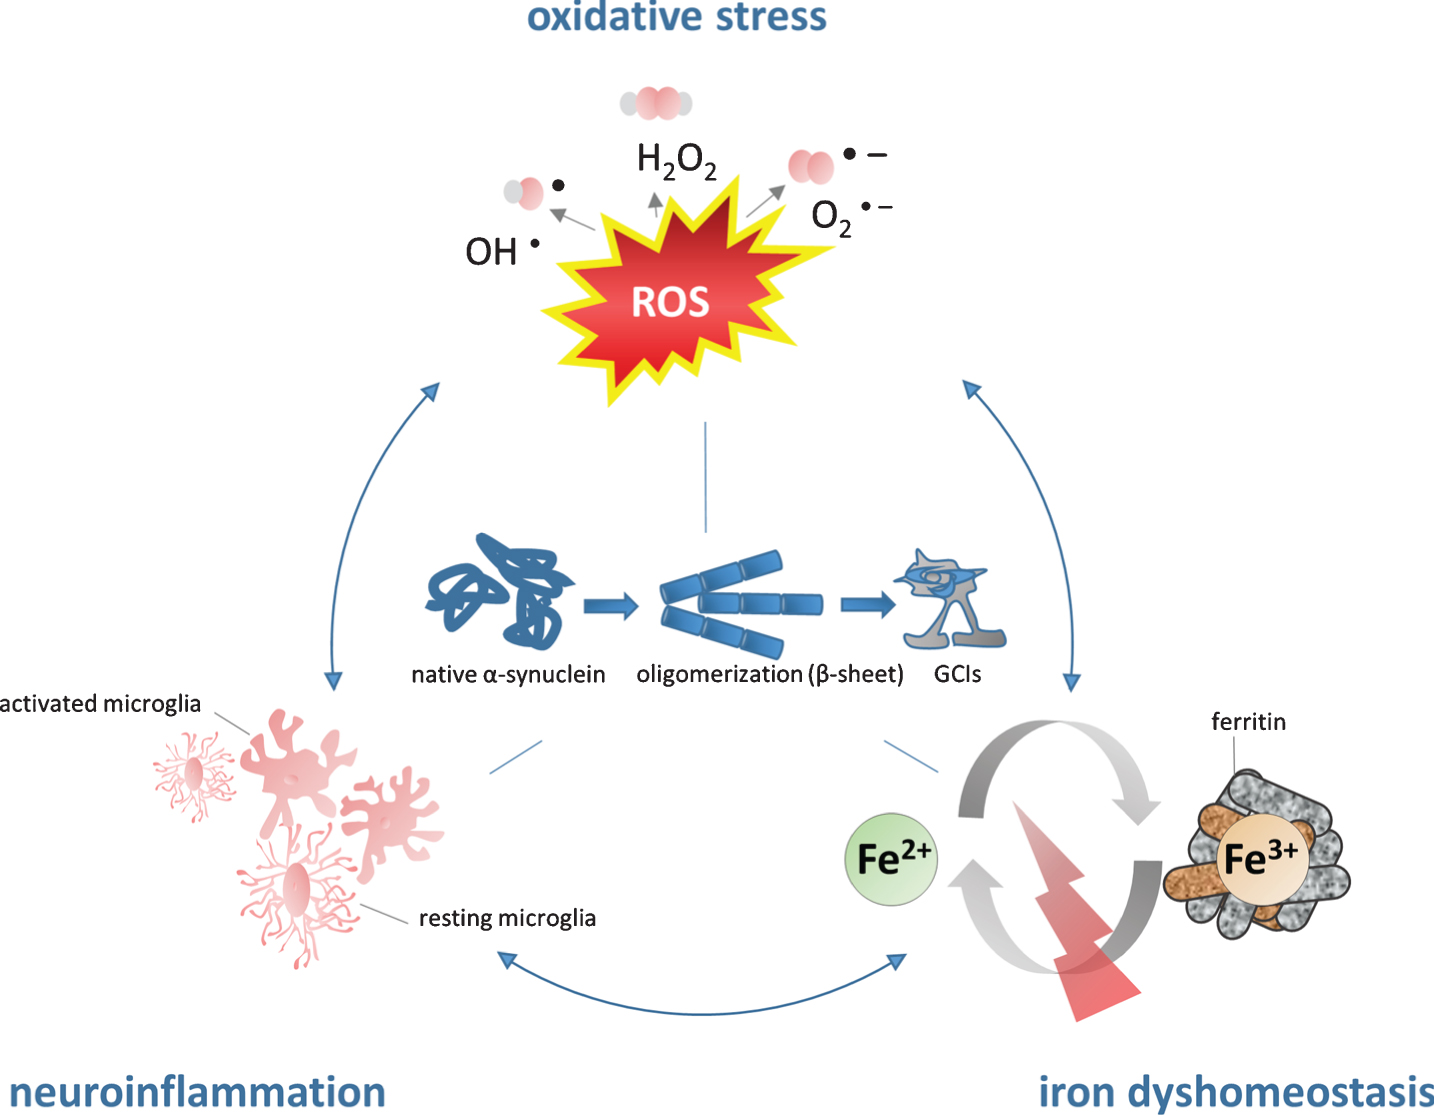 The role of iron in the pathogenesis of MSA. Iron dyshomeostasis is associated with increased levels of oxidative stress and microglial activation. The consecutive formation of a synergistic self-feeding cycle promotes α-SYN aggregation and secondary neurodegeneration. Fe2 +, ferrous form of iron, Fe3 +, ferric form of iron, GCIs, glial cytoplasmic inclusions; H2O2, hydrogen peroxide; O2-, superoxide anion; OH-, hydroxyl radical; ROS, reactive oxygen species.